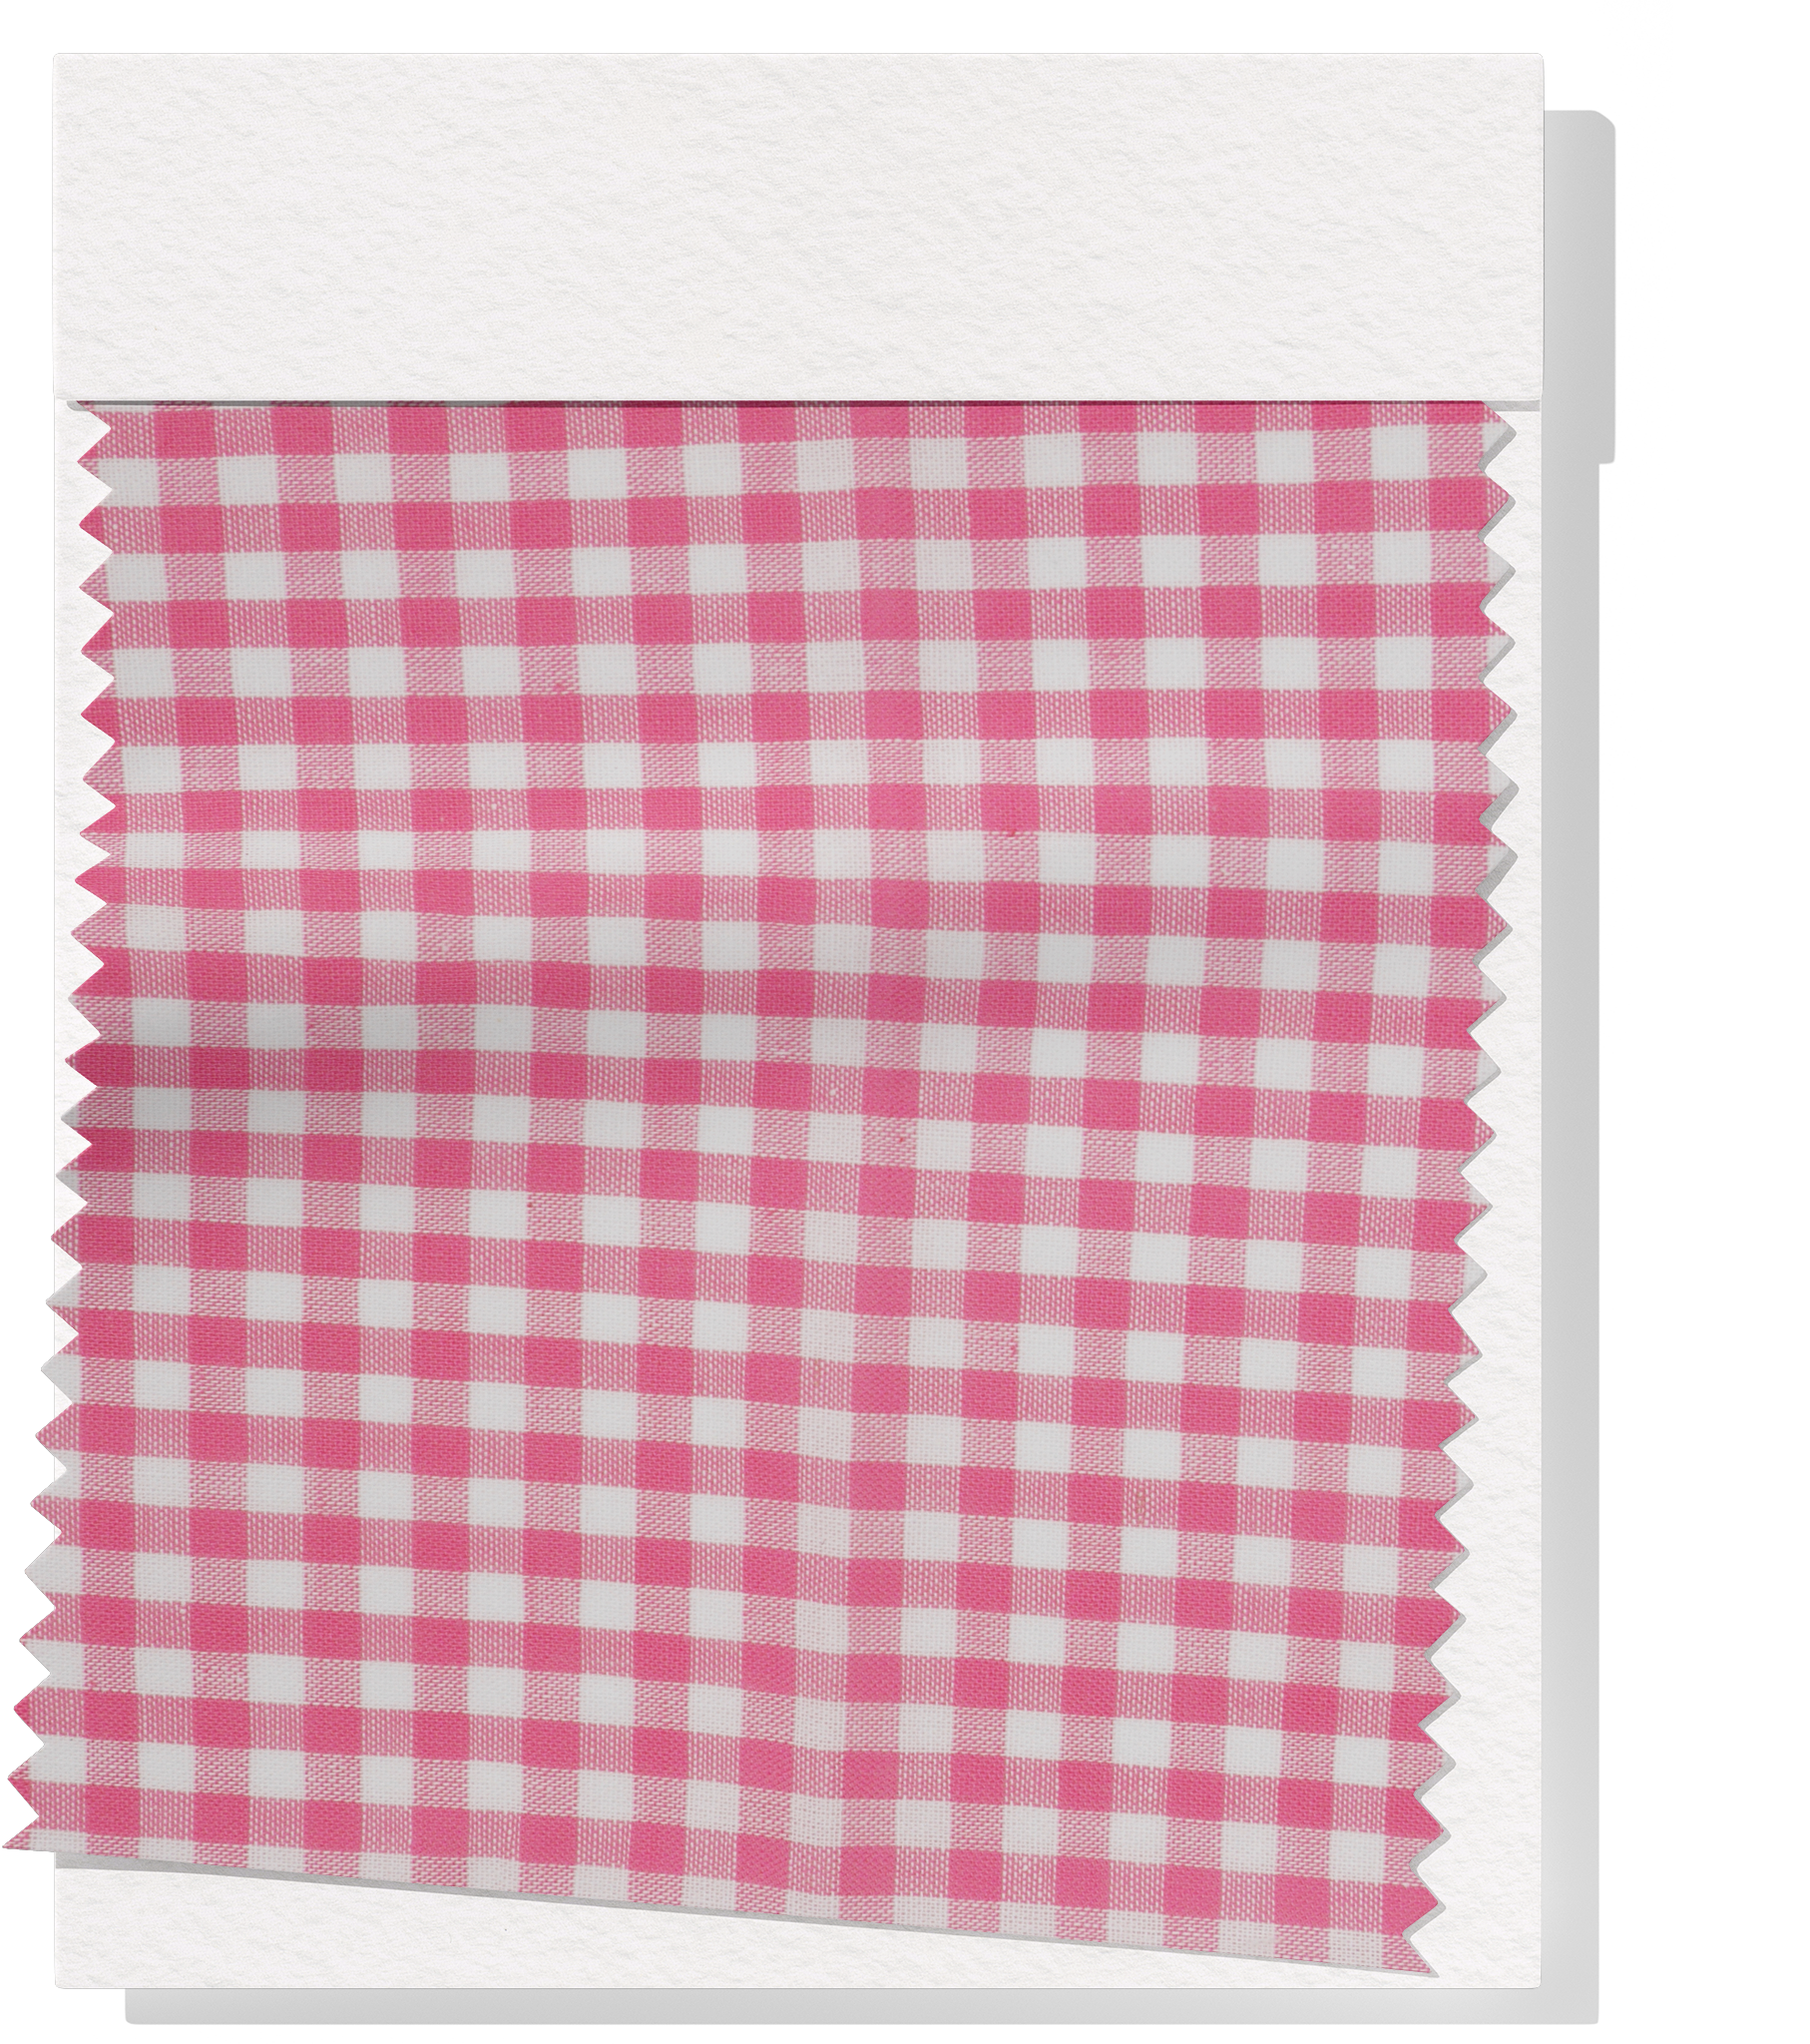 Cotton Gingham Print $14.00p/m - Pink & White (Small)